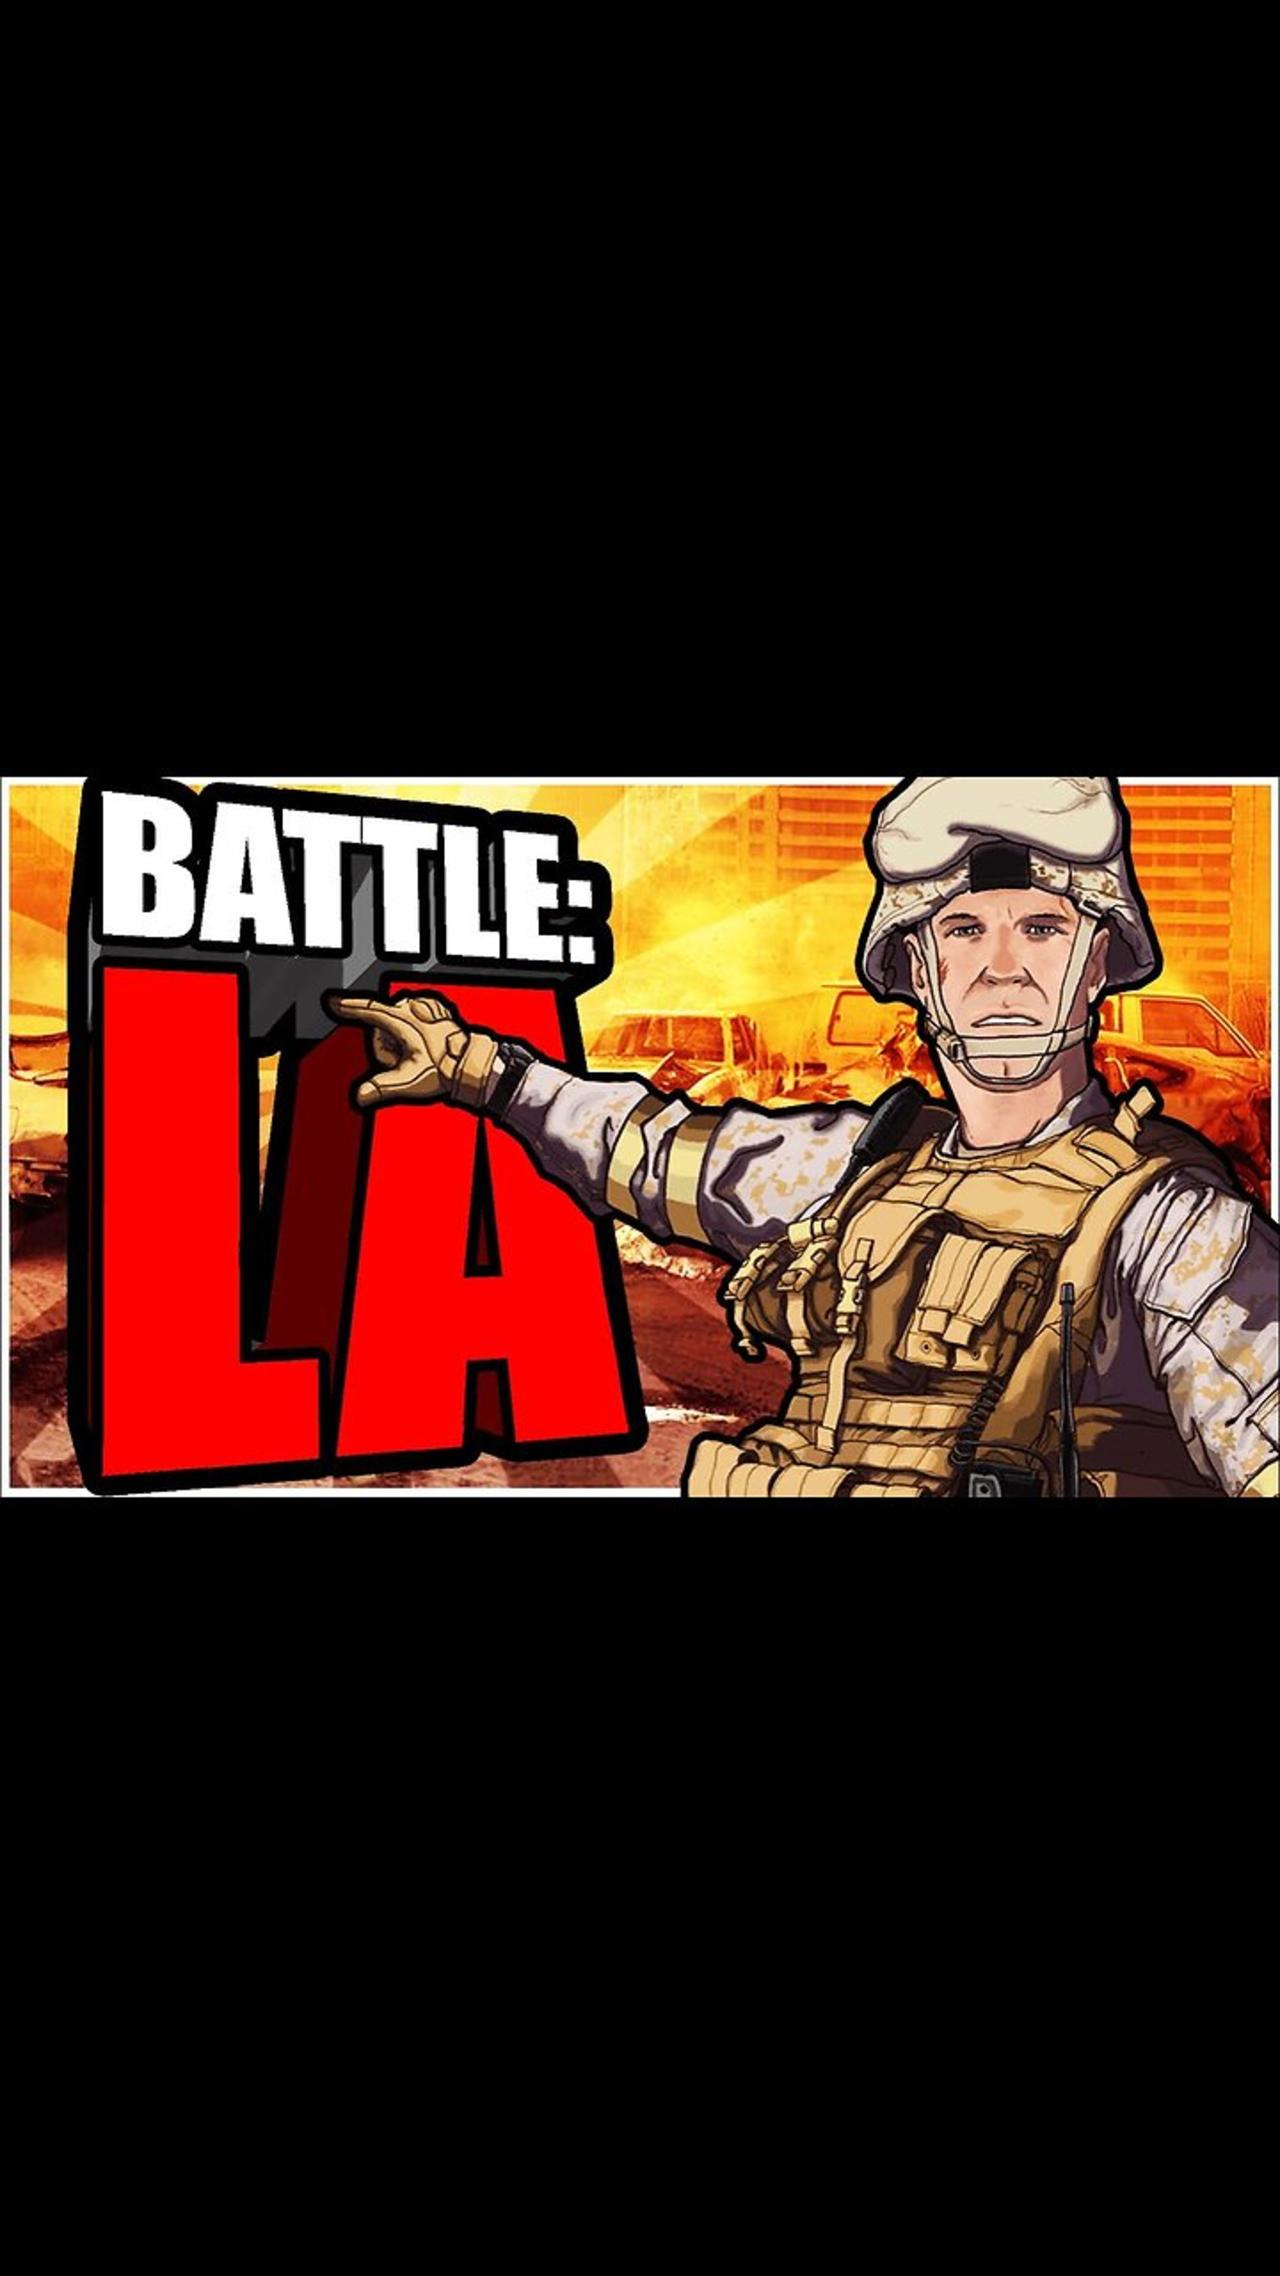 City Under Siege Battle Los Angeles - Command Your Troops, Defend Your Home! 🔥